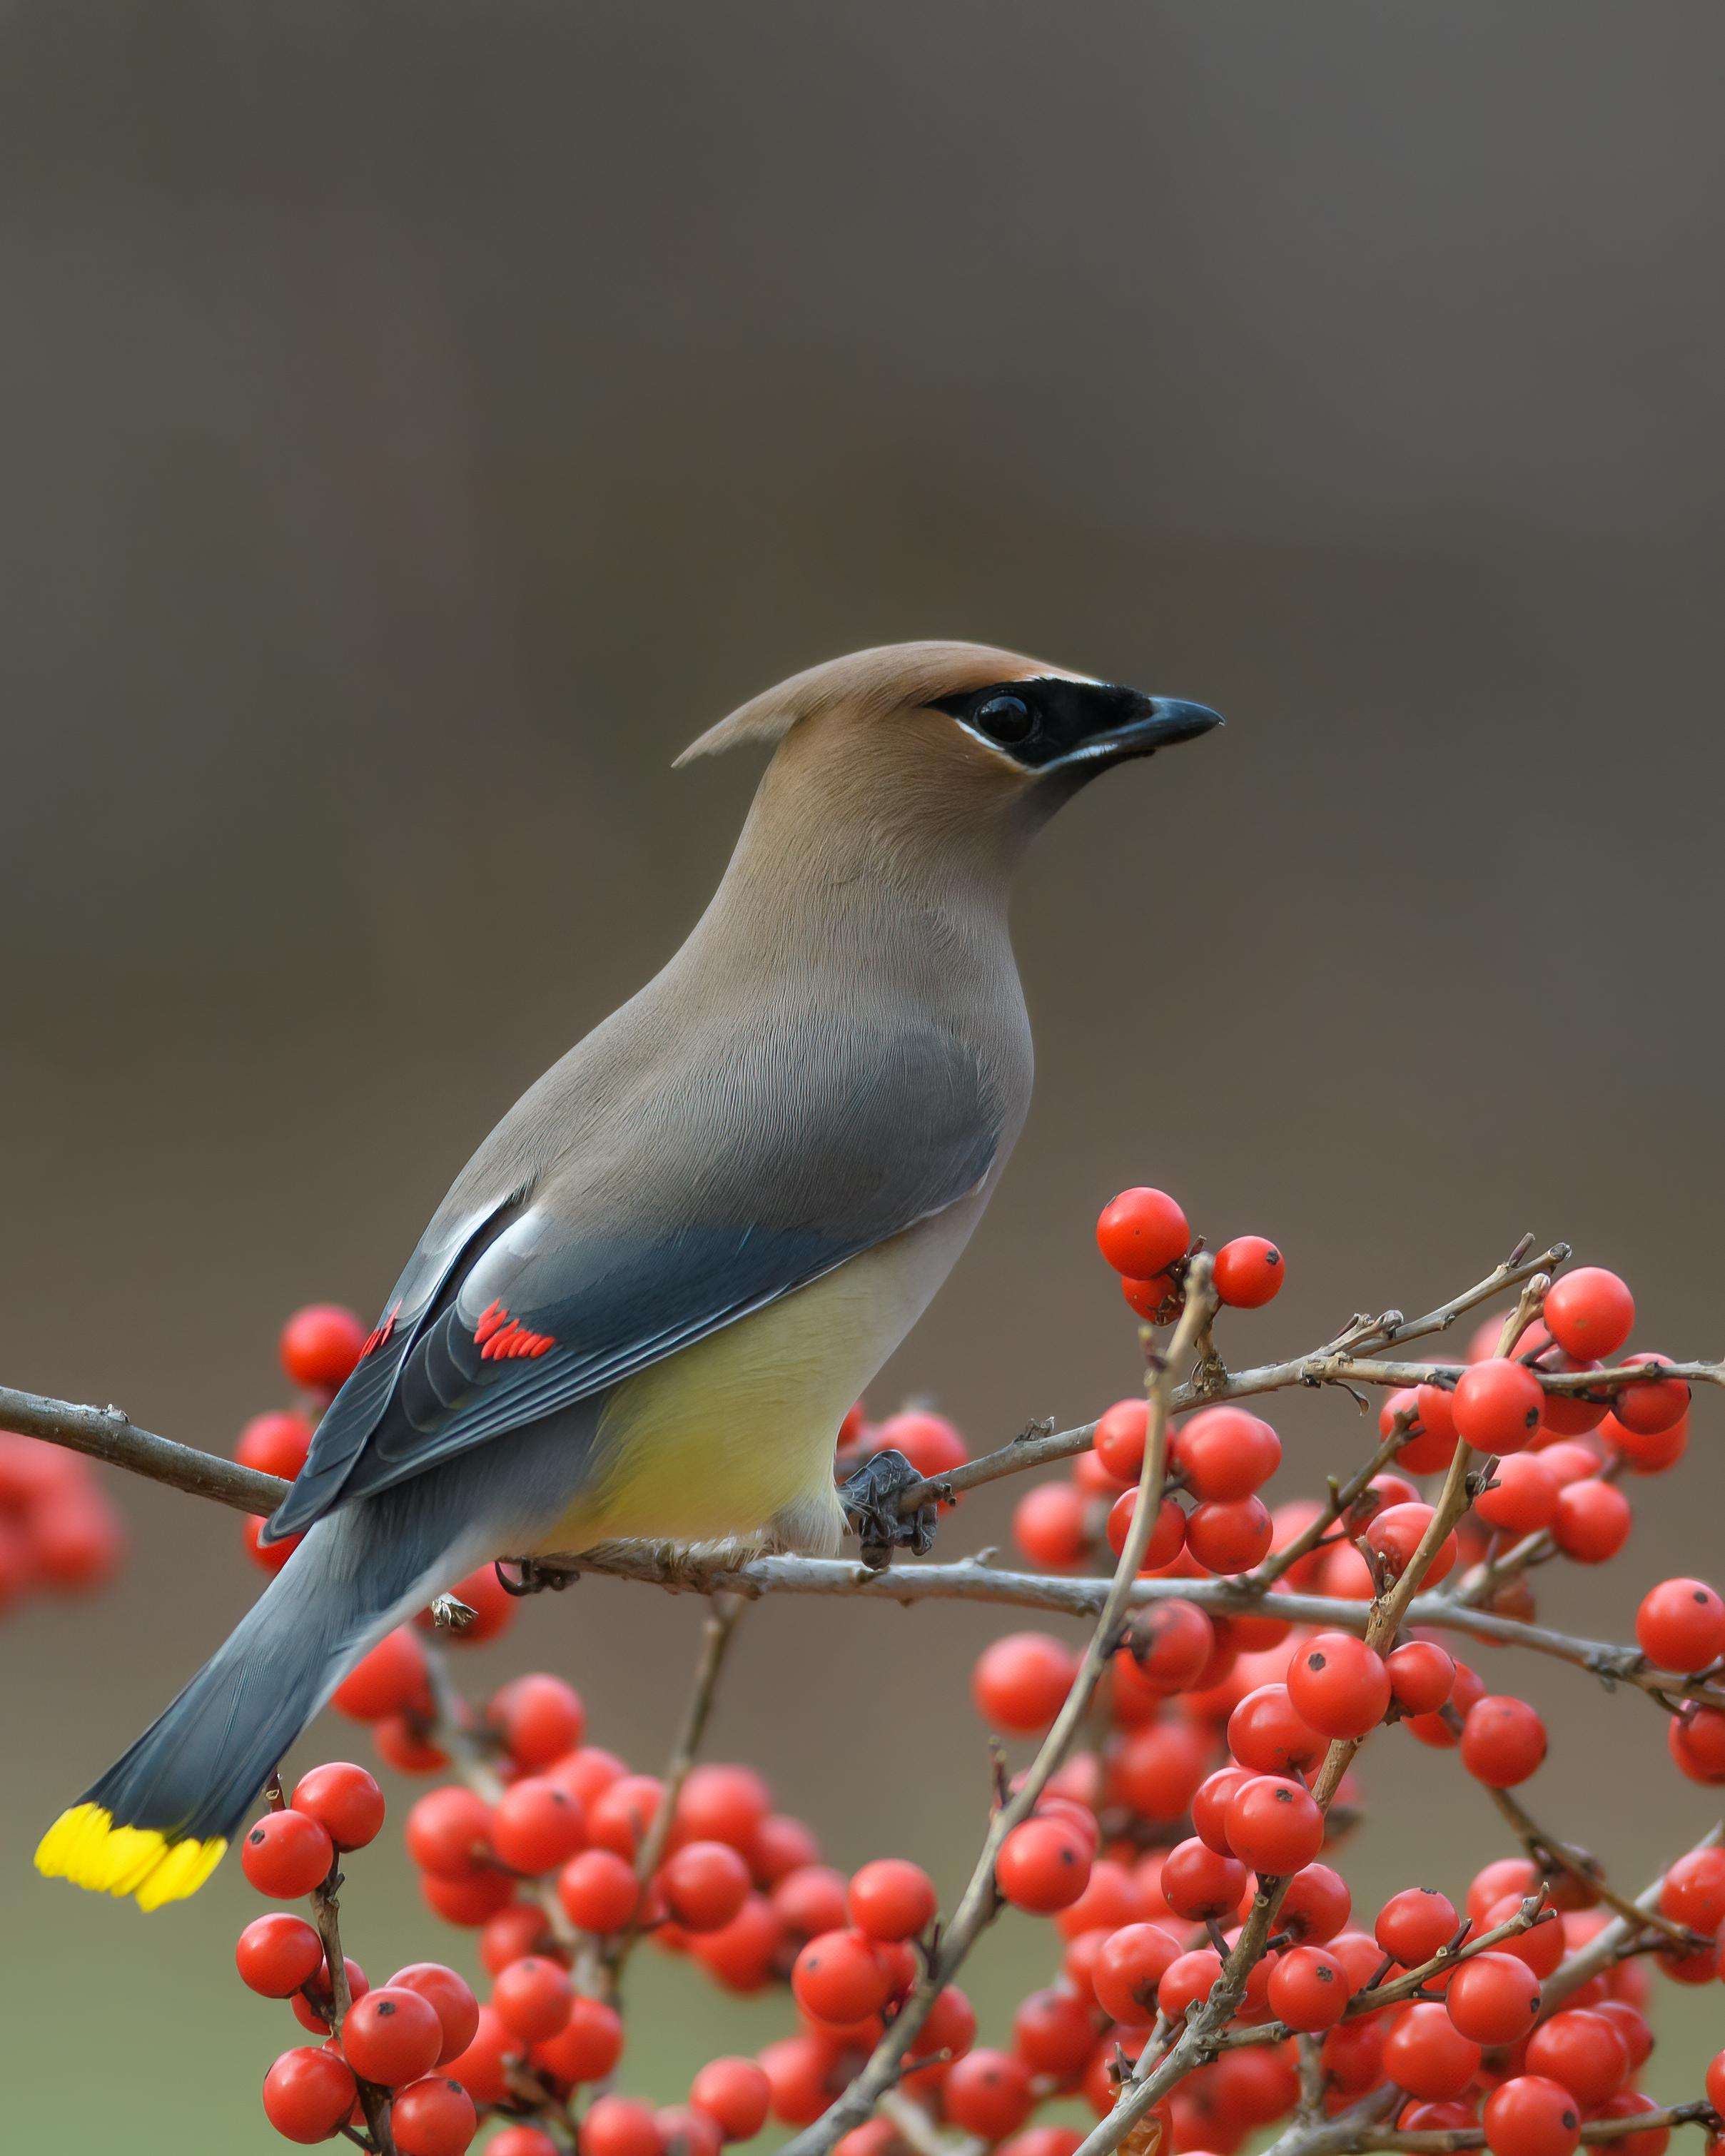 image showing [OC] Smoothest bird in town: the cedar waxwing!